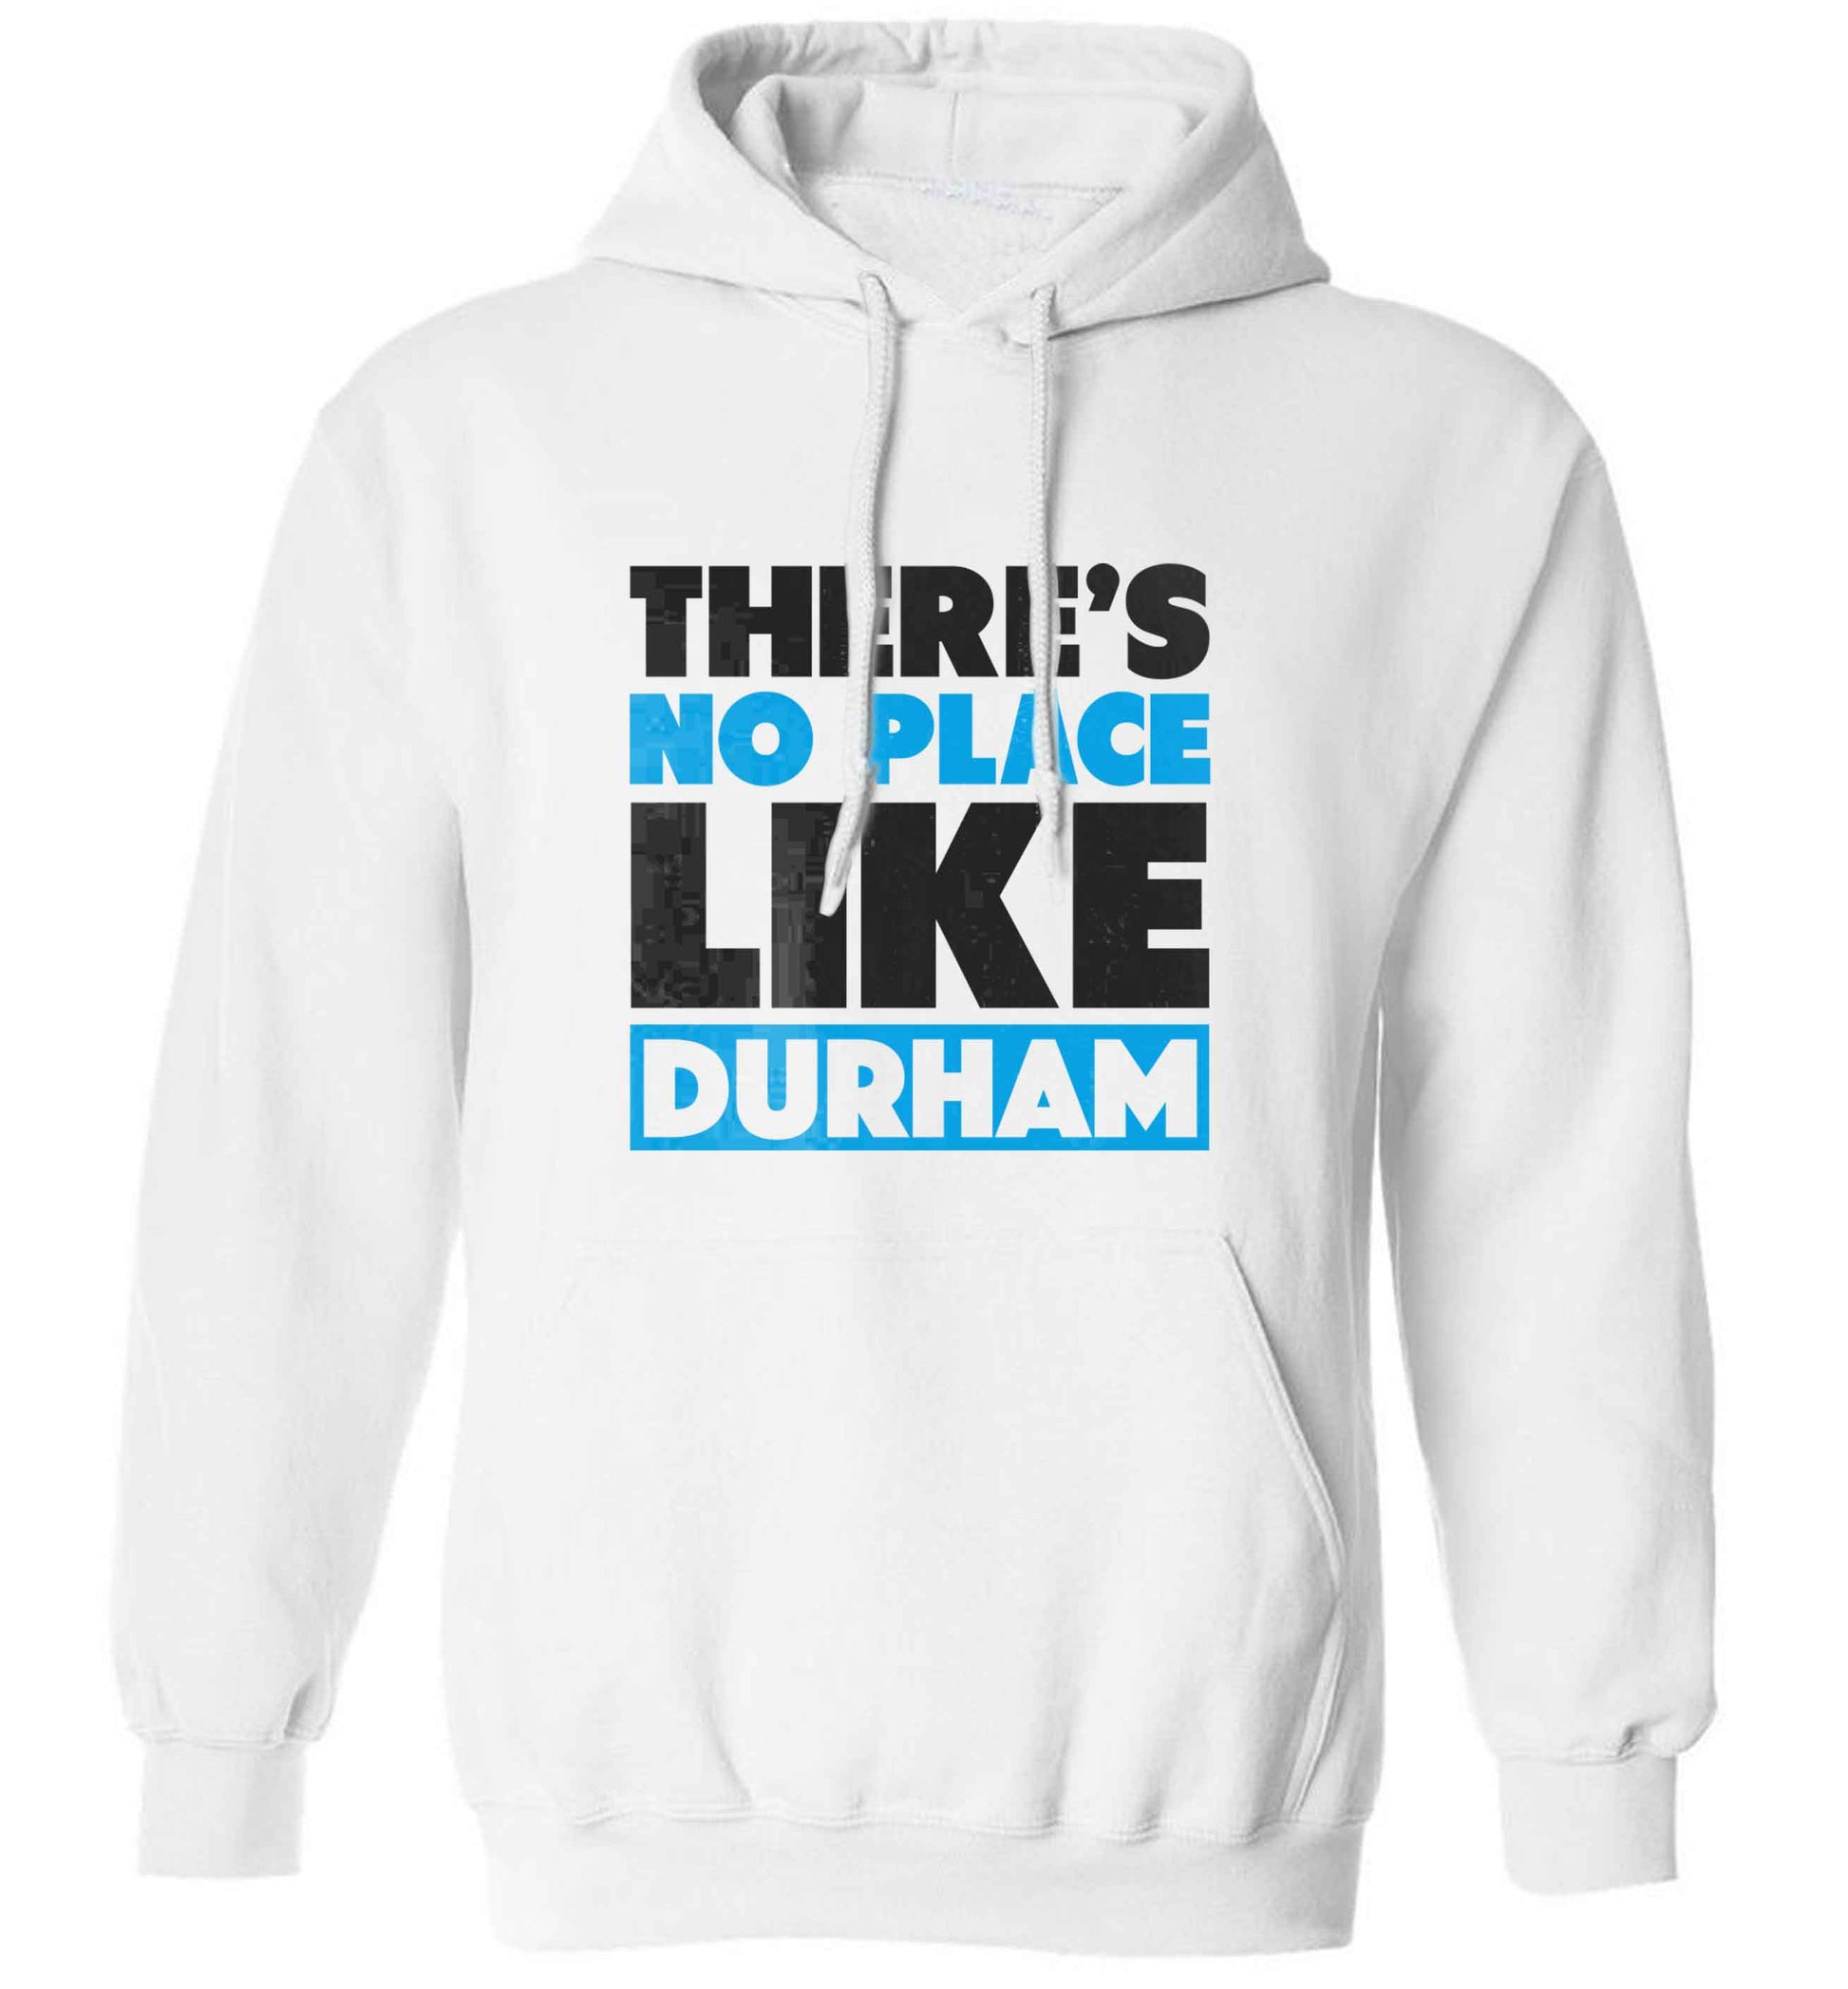 There's no place like Durham adults unisex white hoodie 2XL